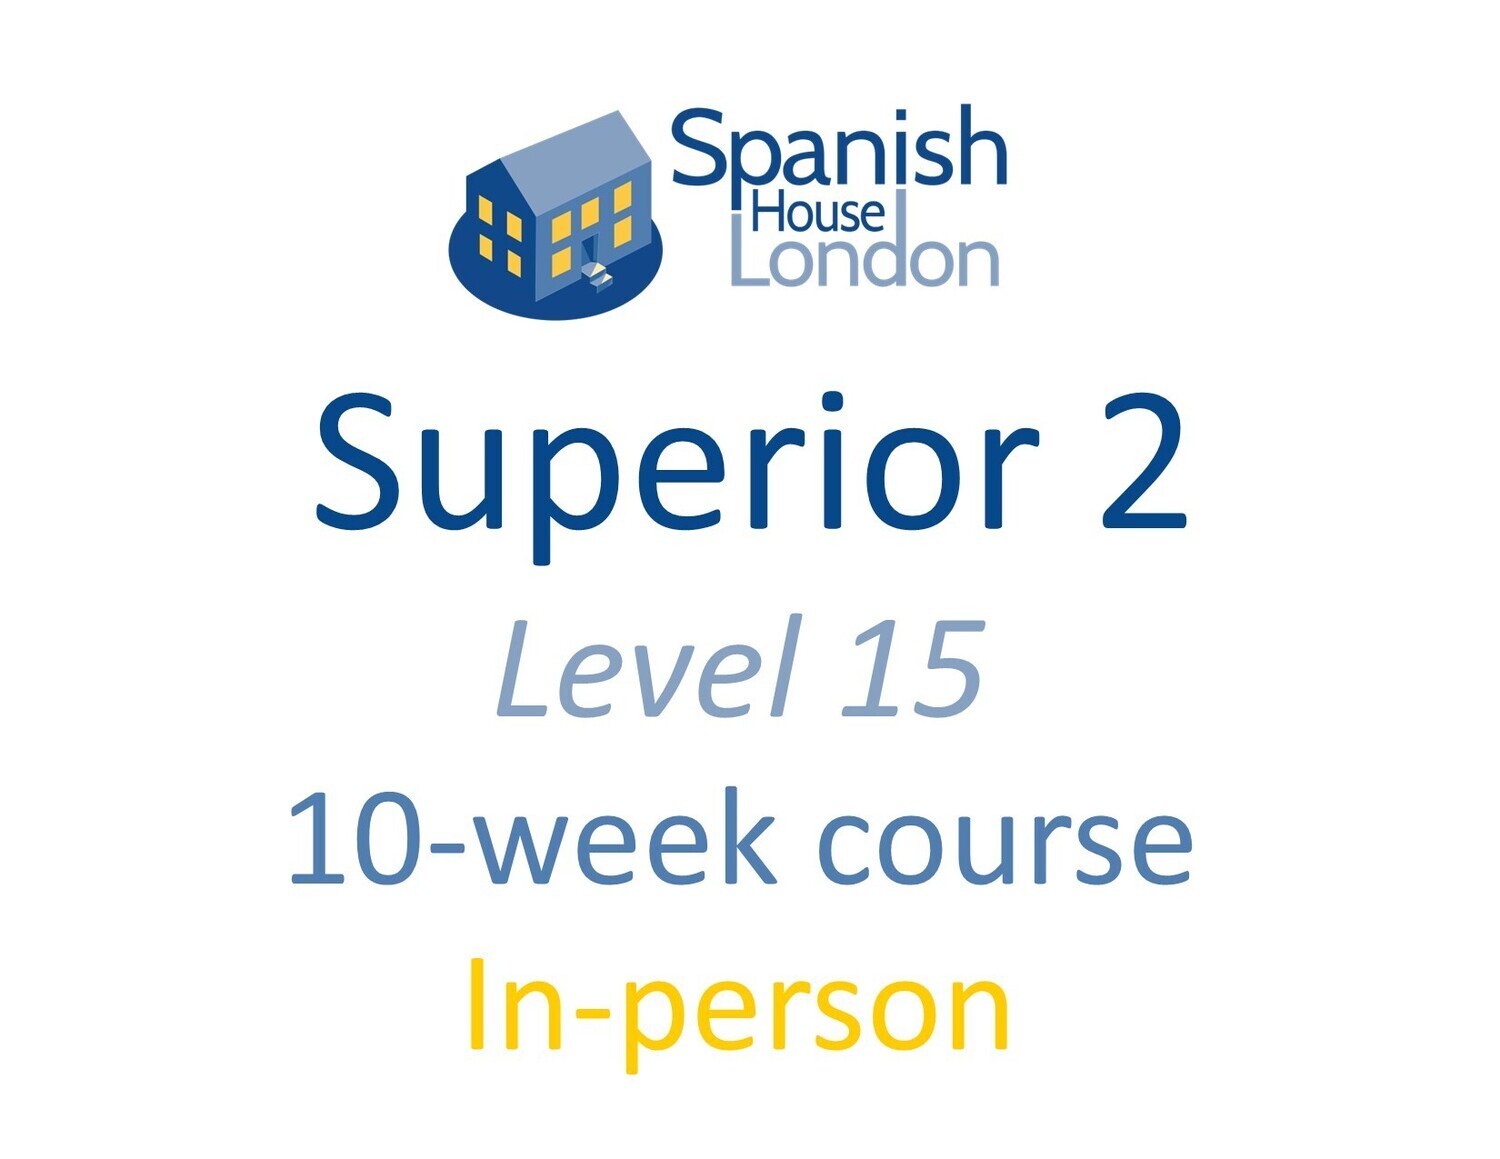 Superior 2 Course starting on 16th October at 7.30pm in Clapham North